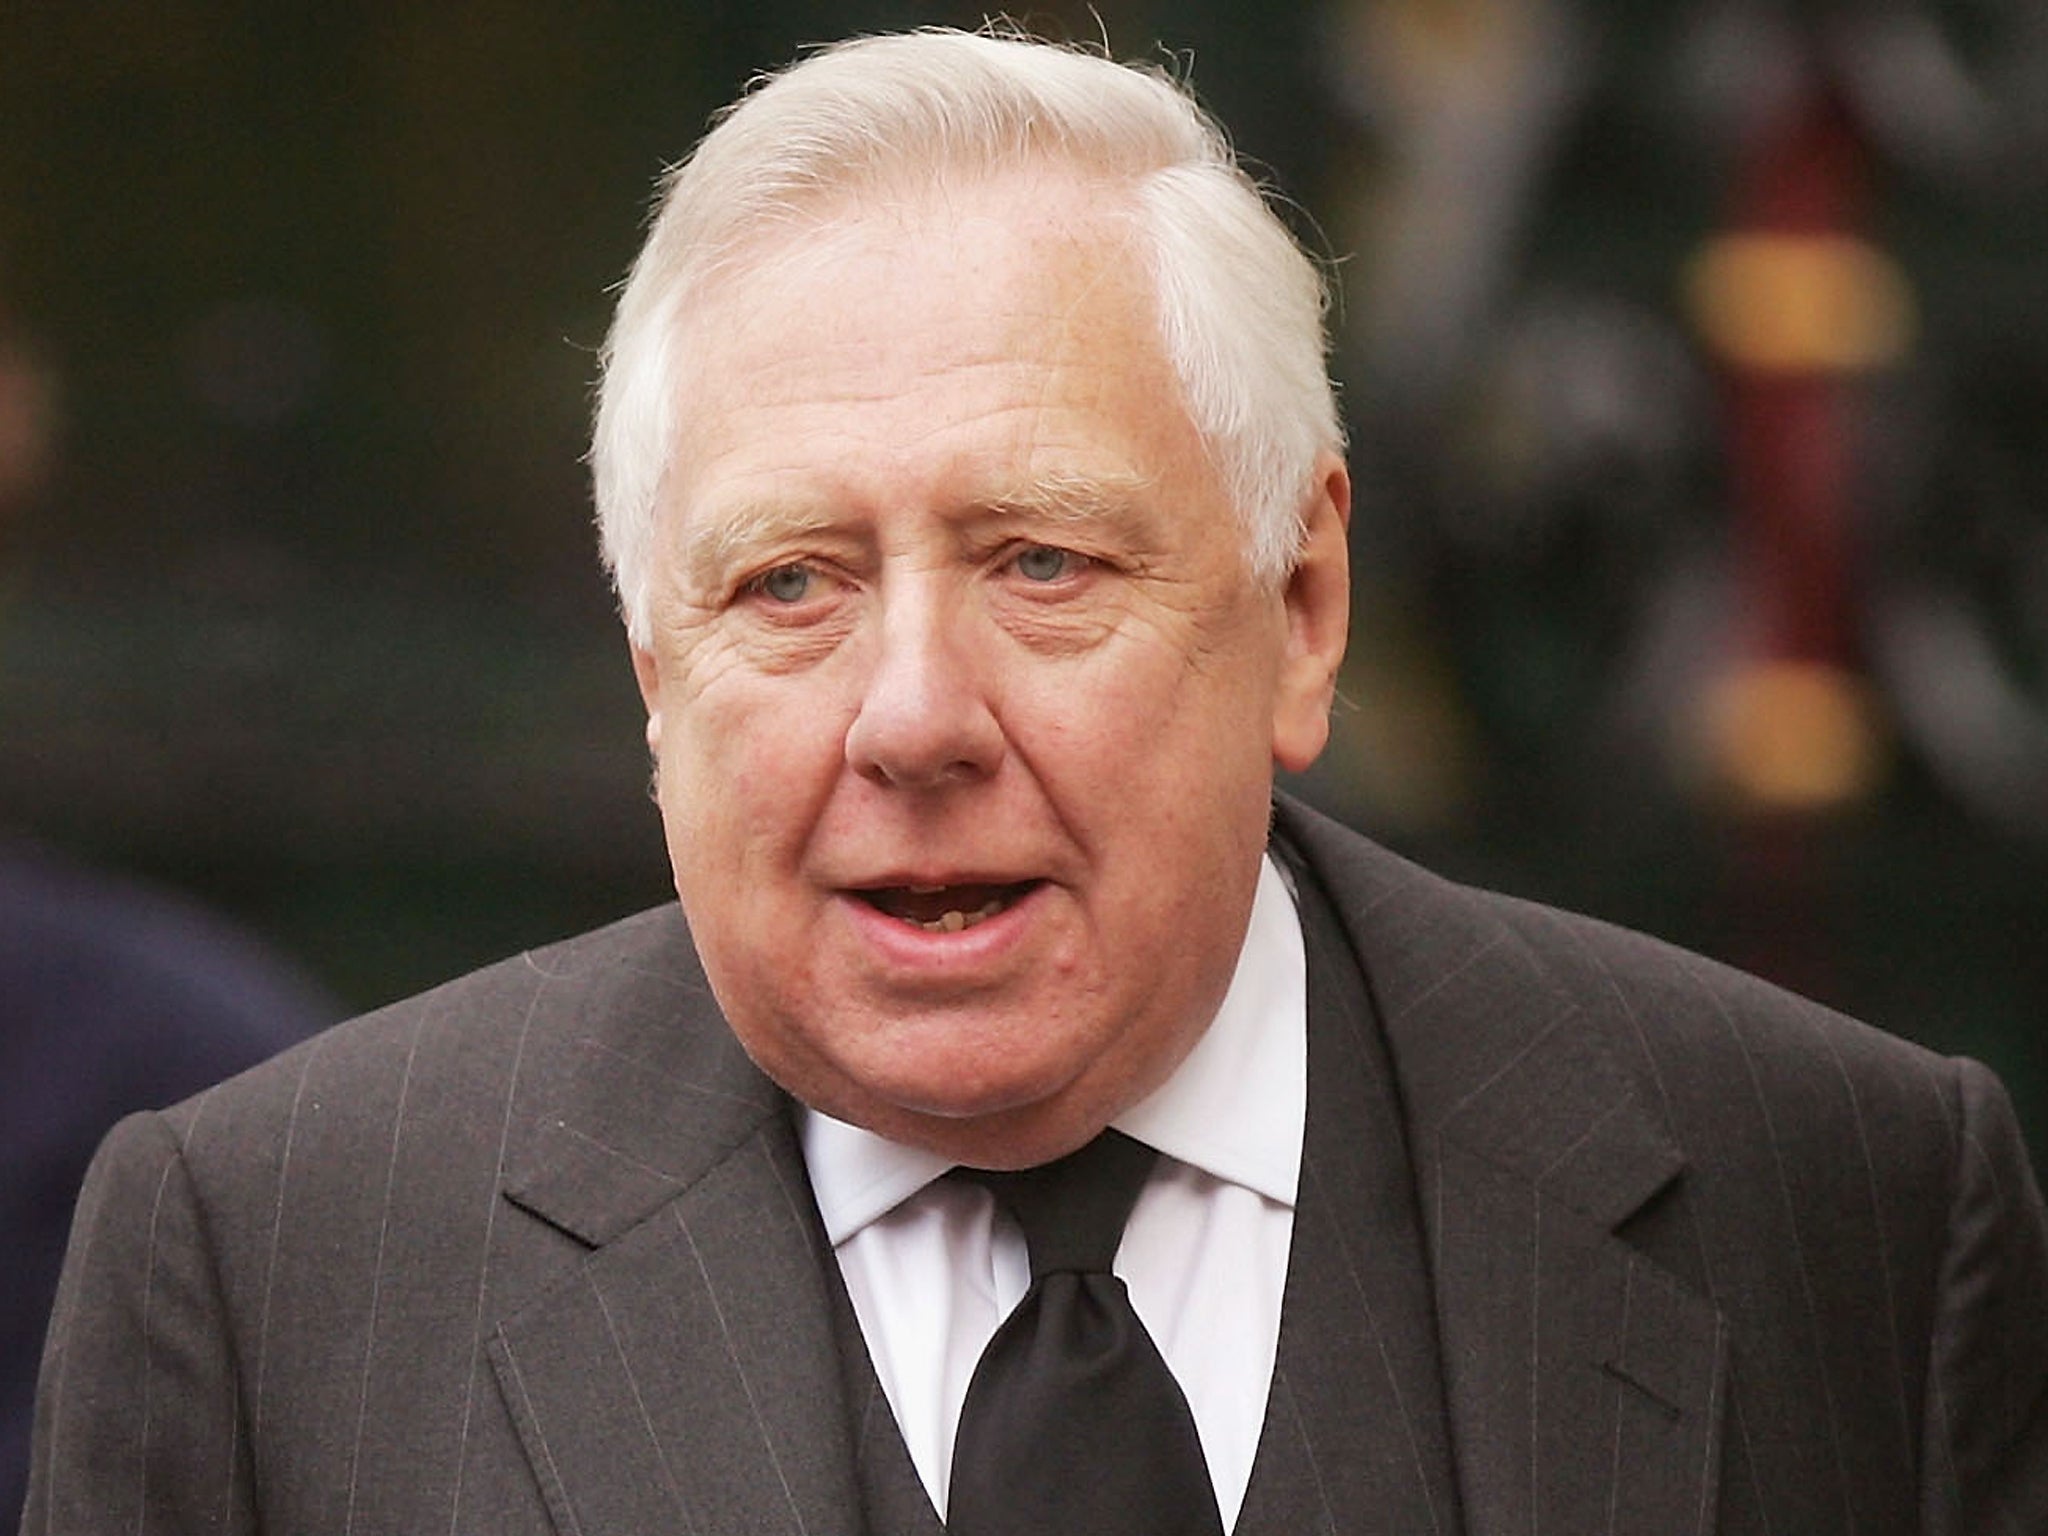 Lord Hattersley, who as Roy Hattersley was MP for Birmingham Sparkbrook, married in 1956